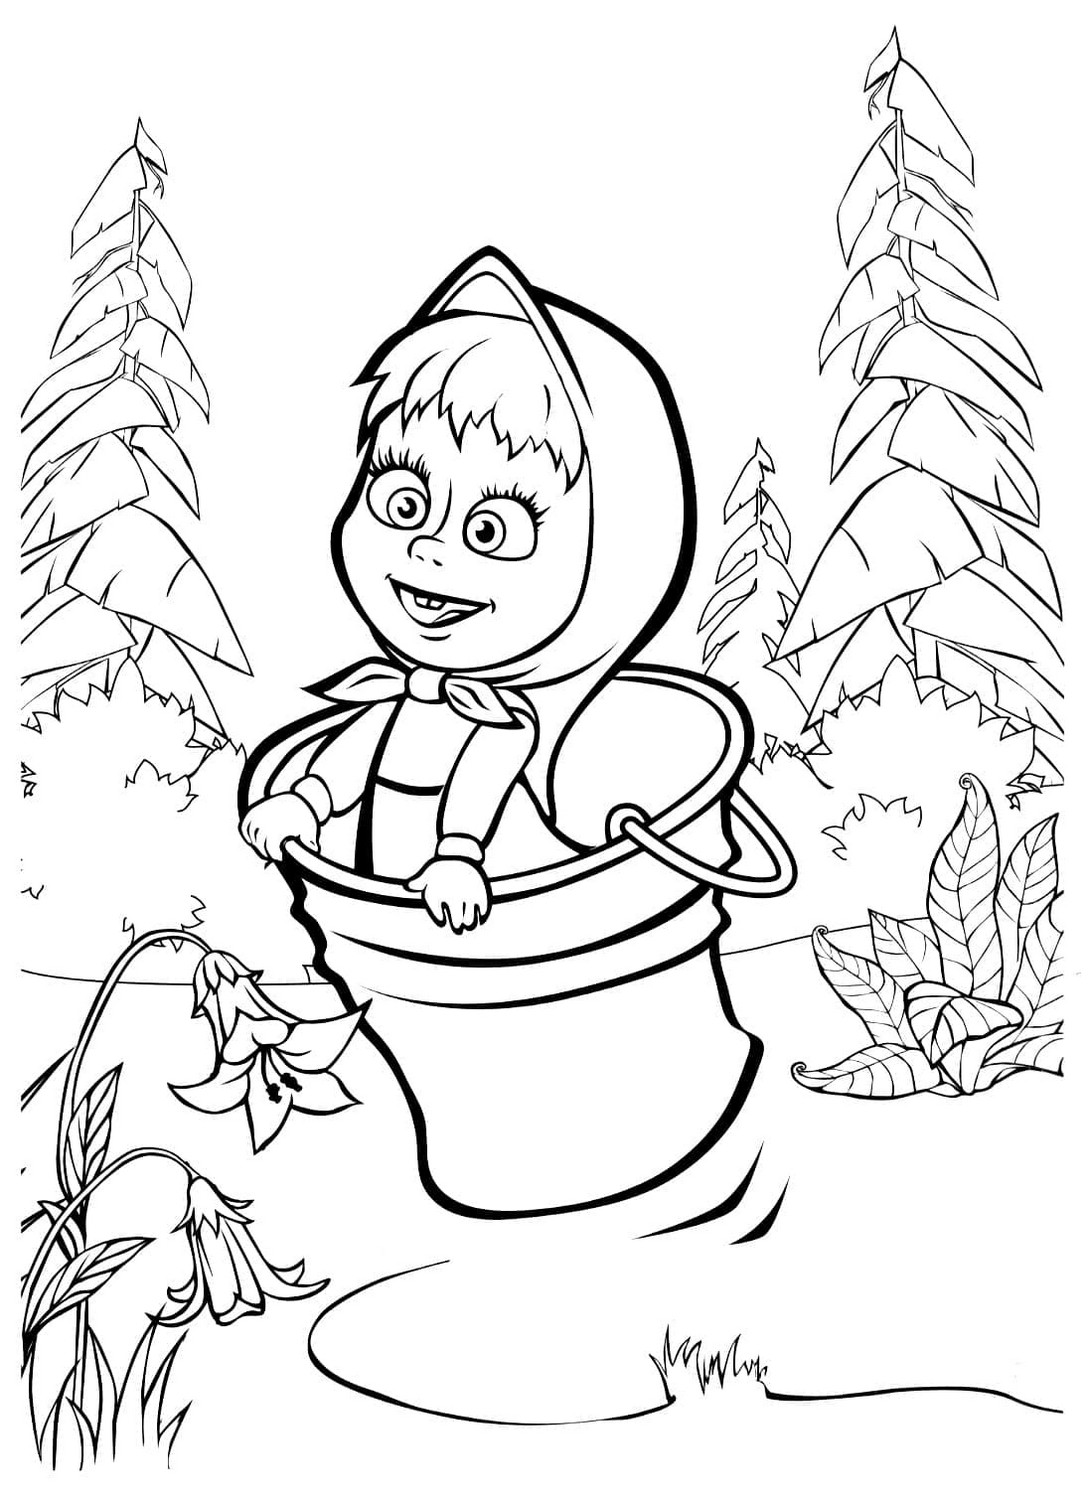 Masha and the Bear 49  coloring pages to print and coloring